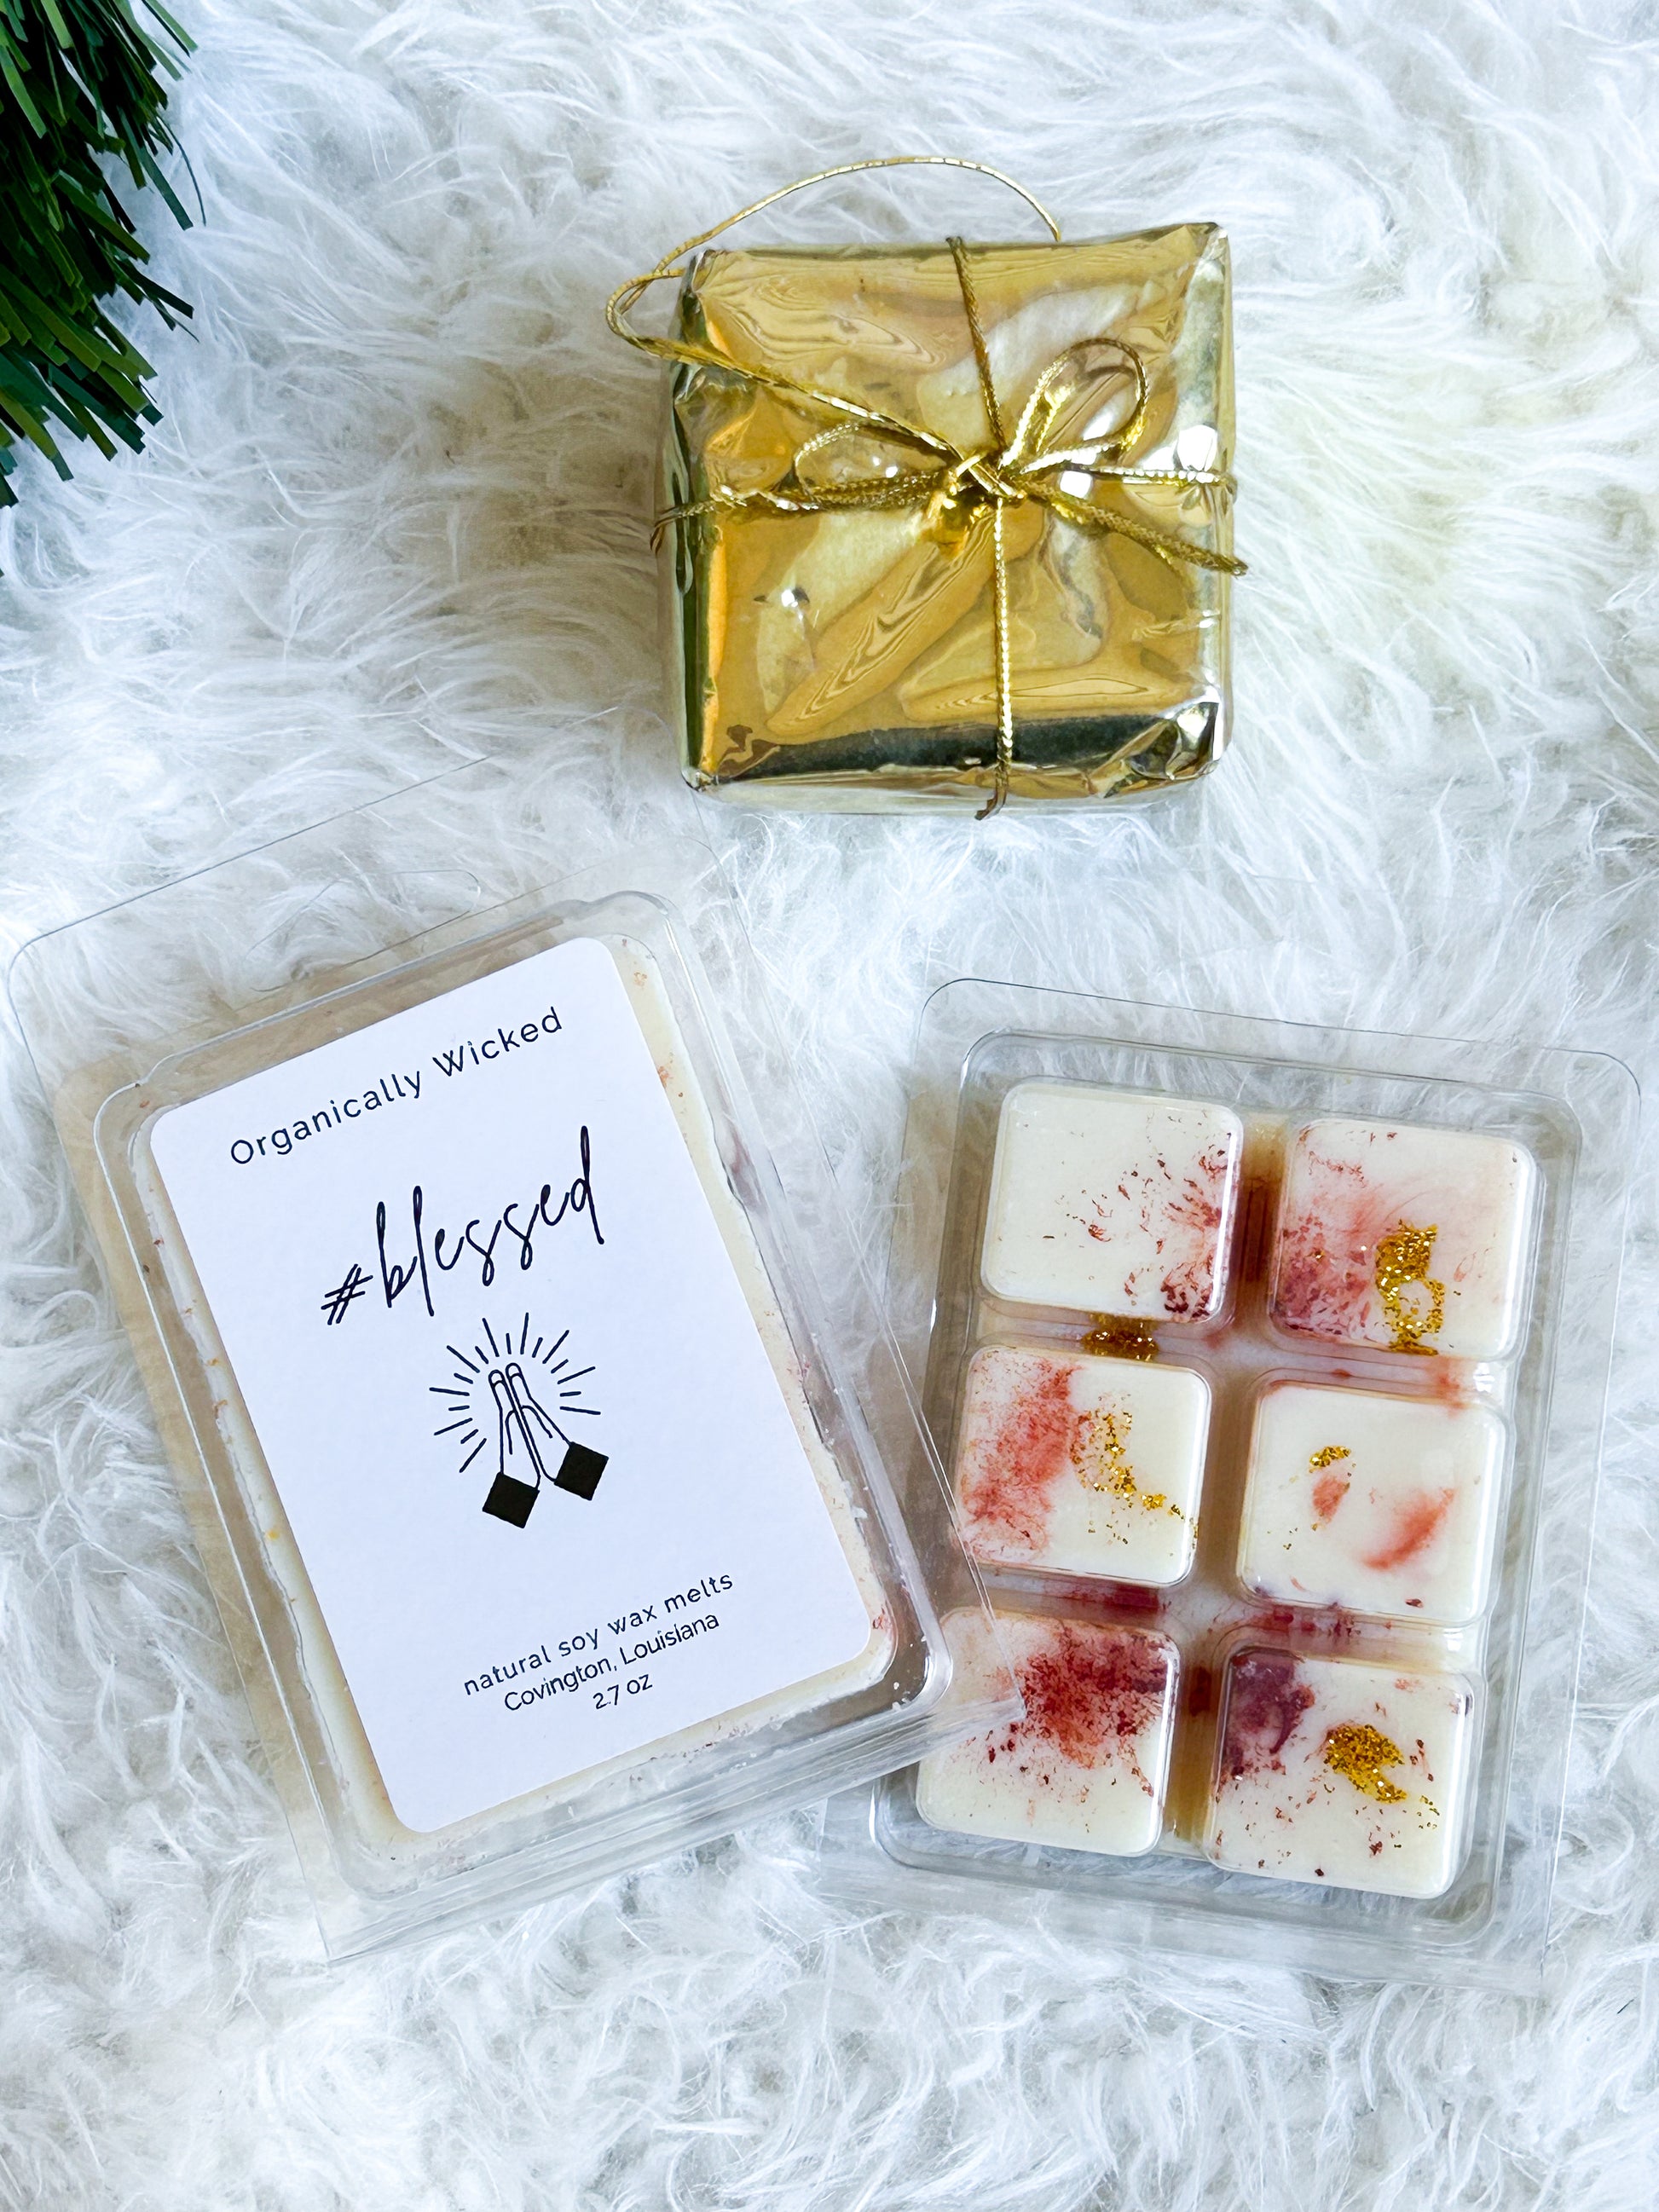 Mulberry All Natural Soy Soy Wax Melts 3 Pack - All Natural + Essential  Oils + Phthalate Free - Shortie's Candle Company